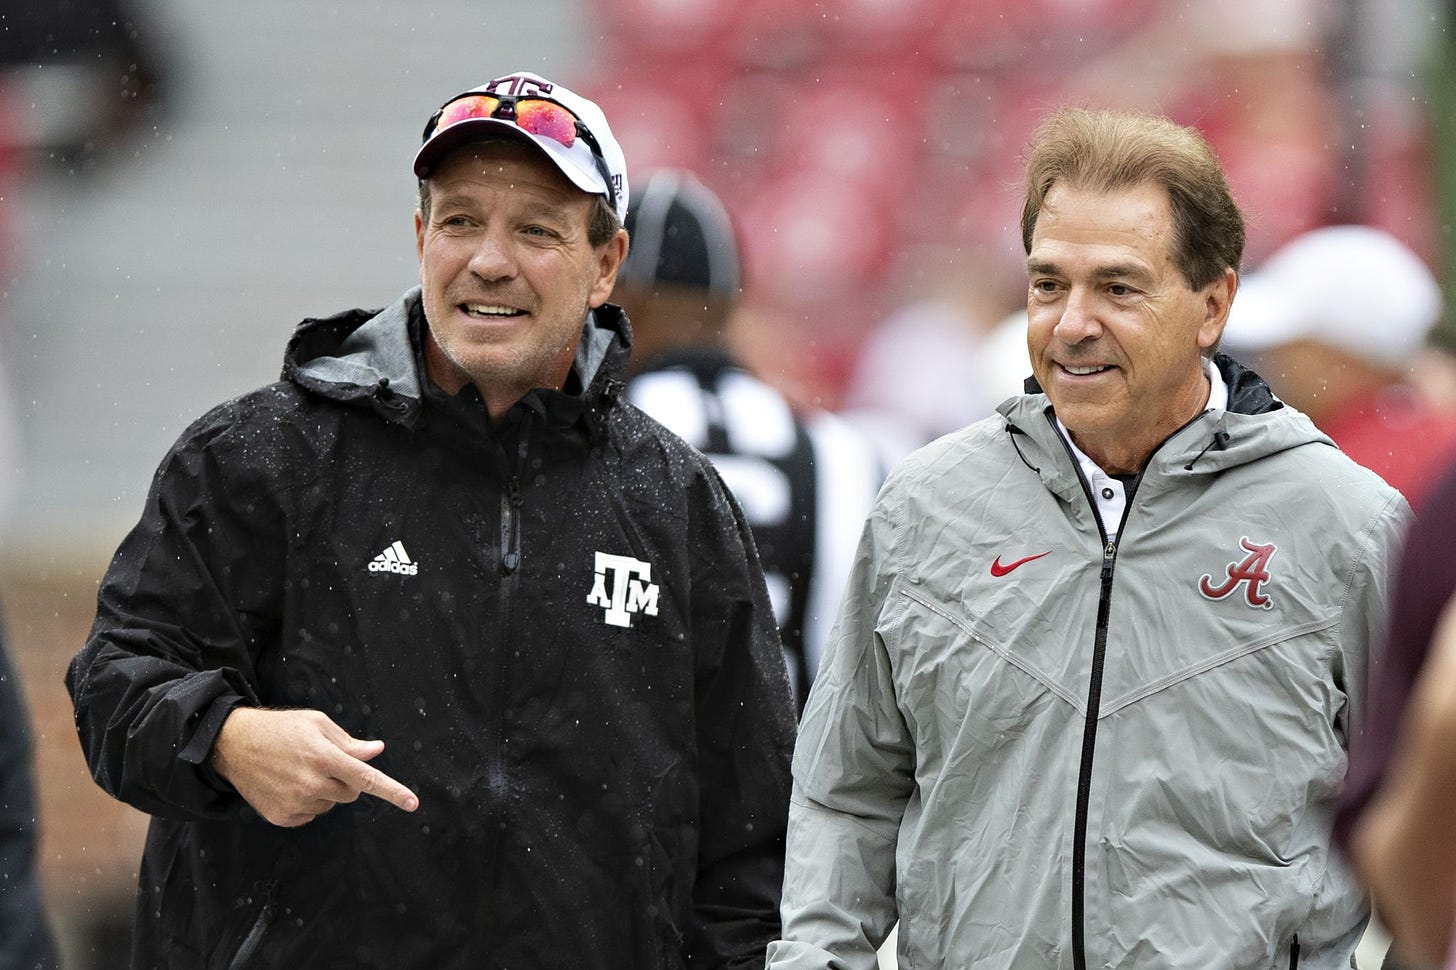 Texas A&M's Jimbo Fisher rips Alabama's Nick Saban to shreds after cheating  accusations